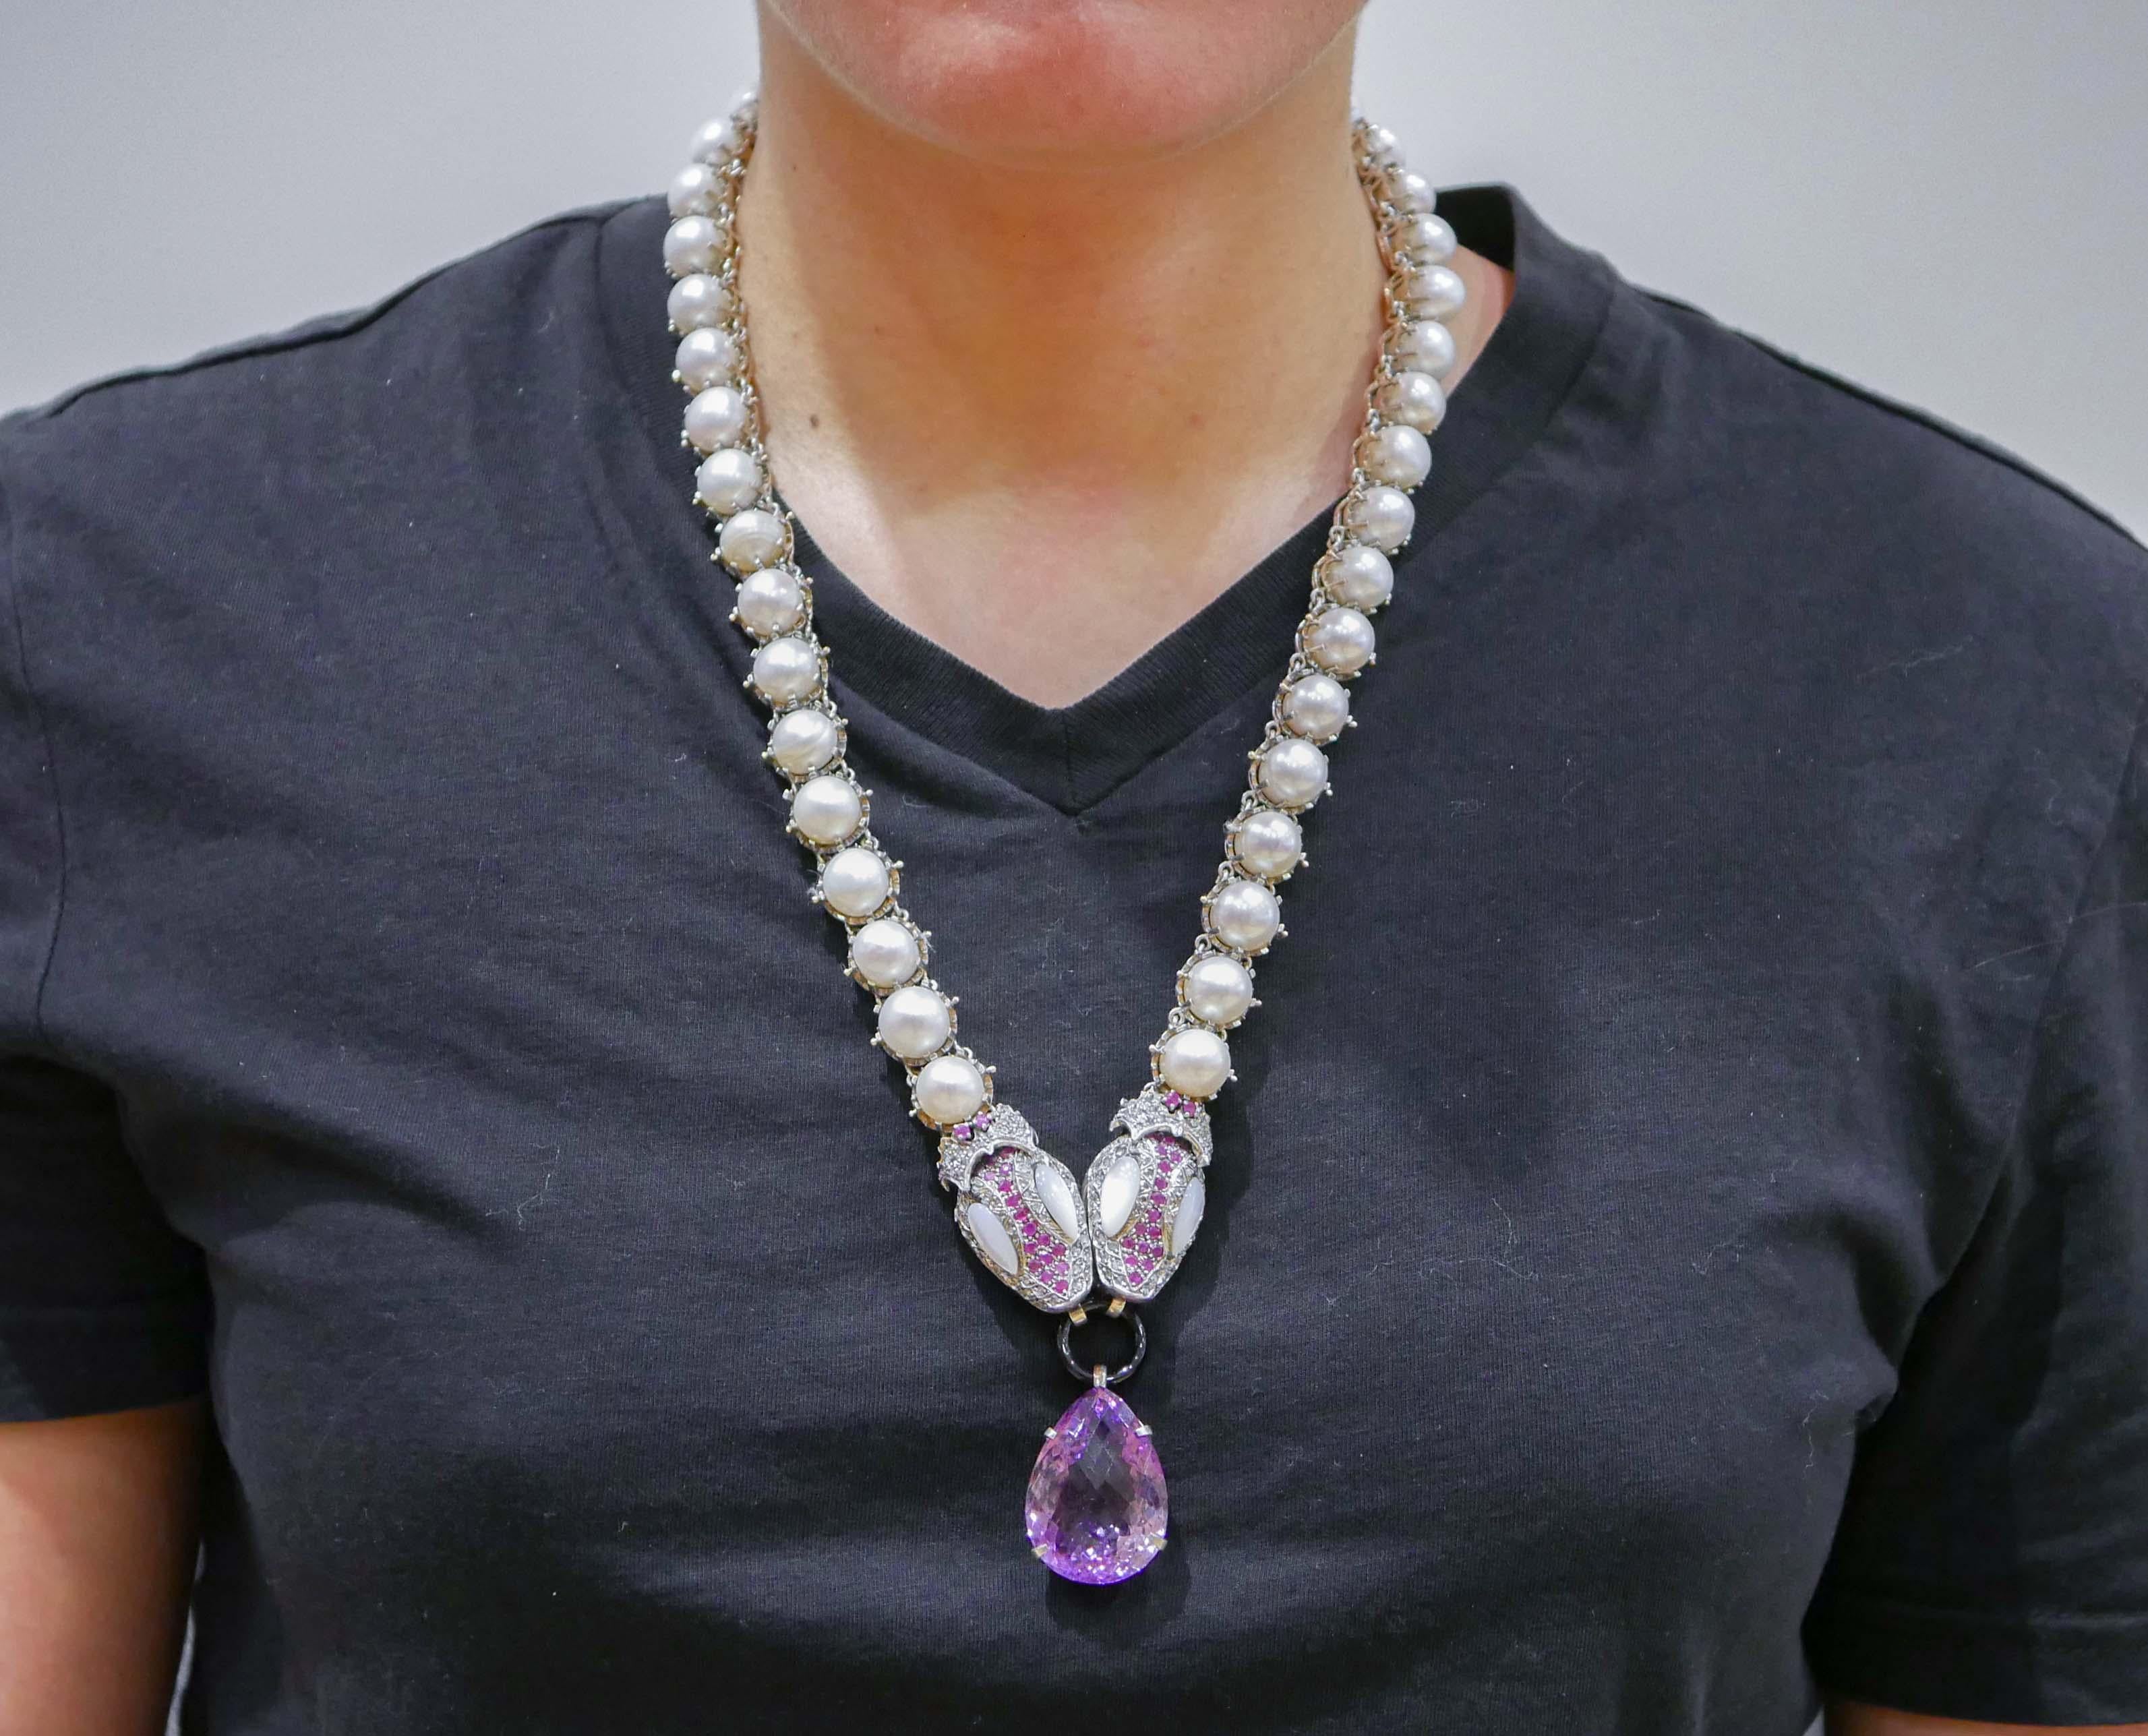 Mixed Cut Amethyst, Rubies, Pearls, White Stones, Diamonds, Rose Gold and Silver Necklace. For Sale